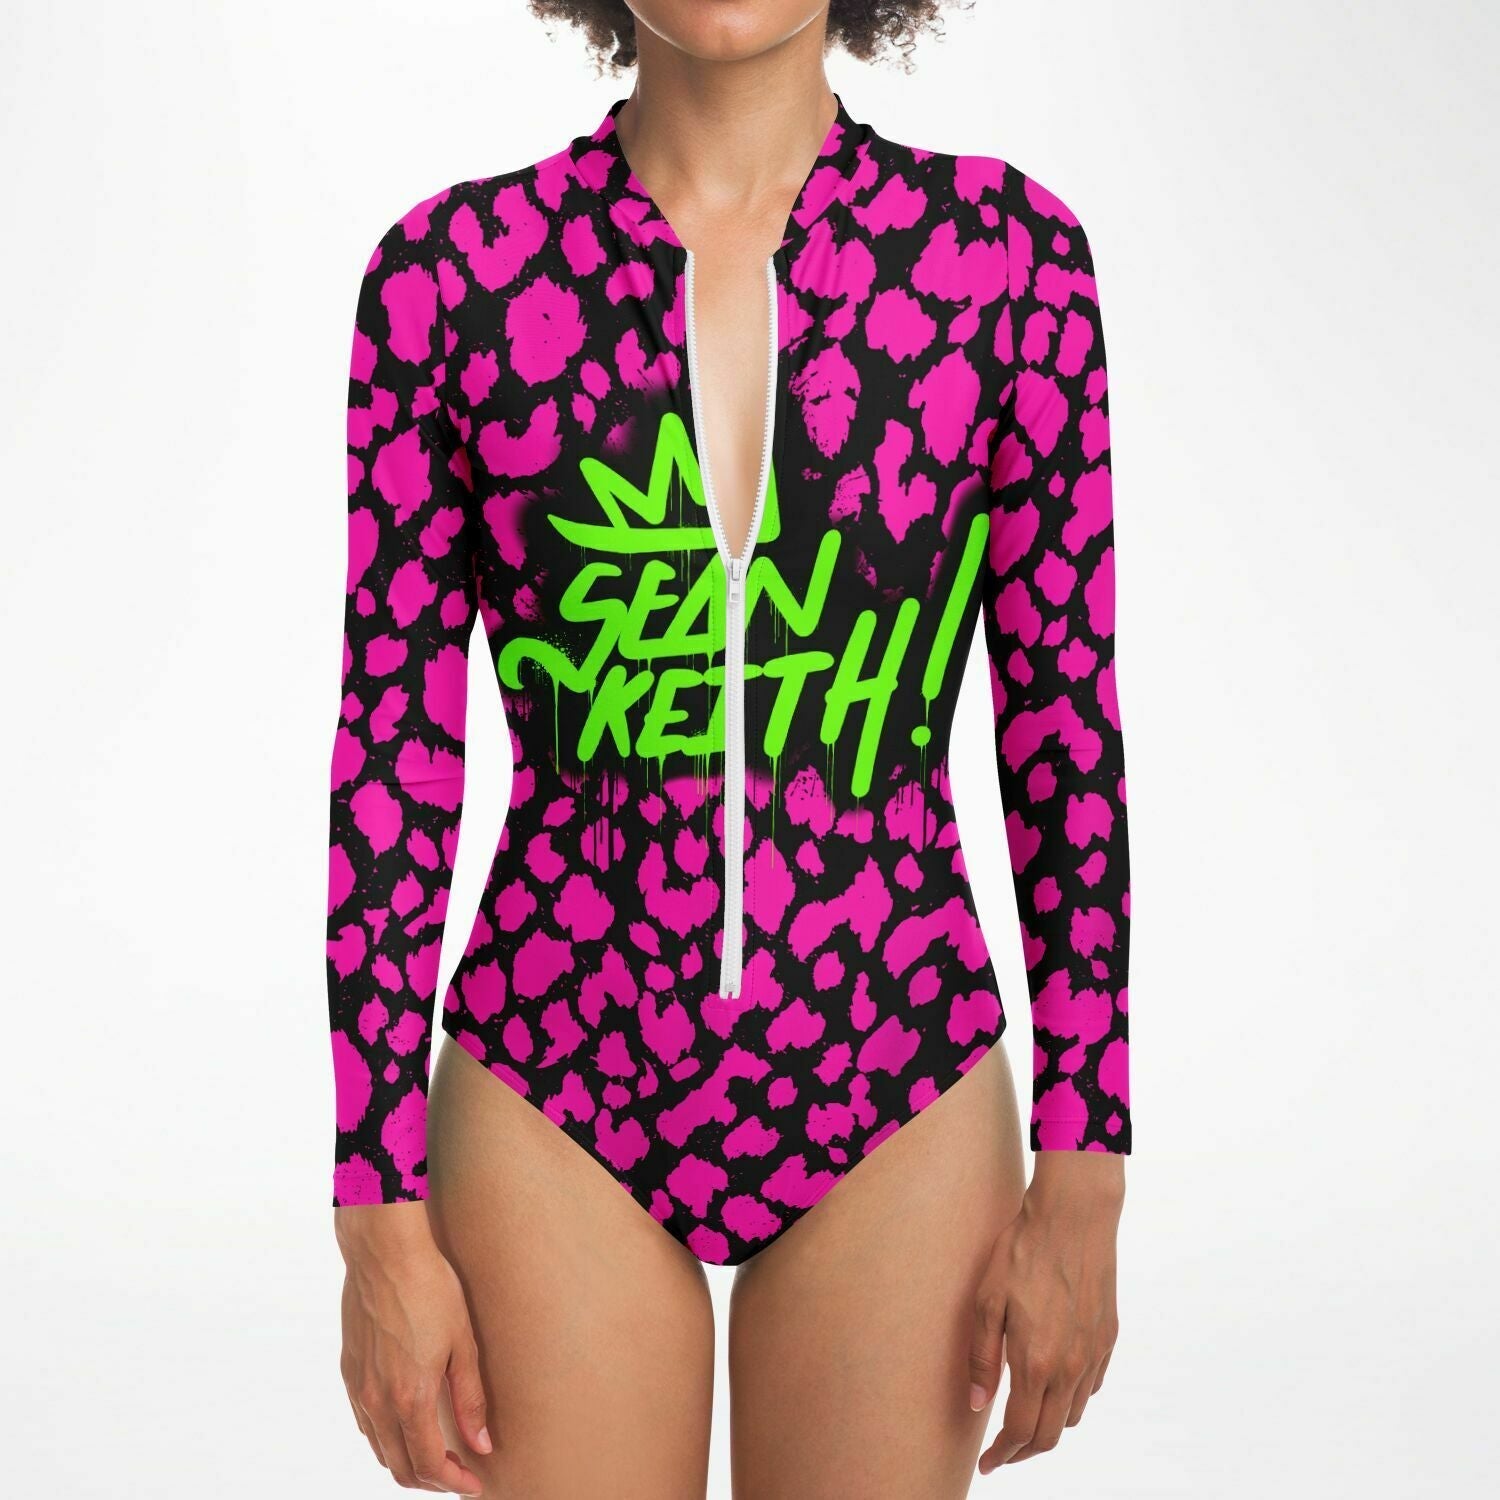 Sean Keith One Piece Swimsuit